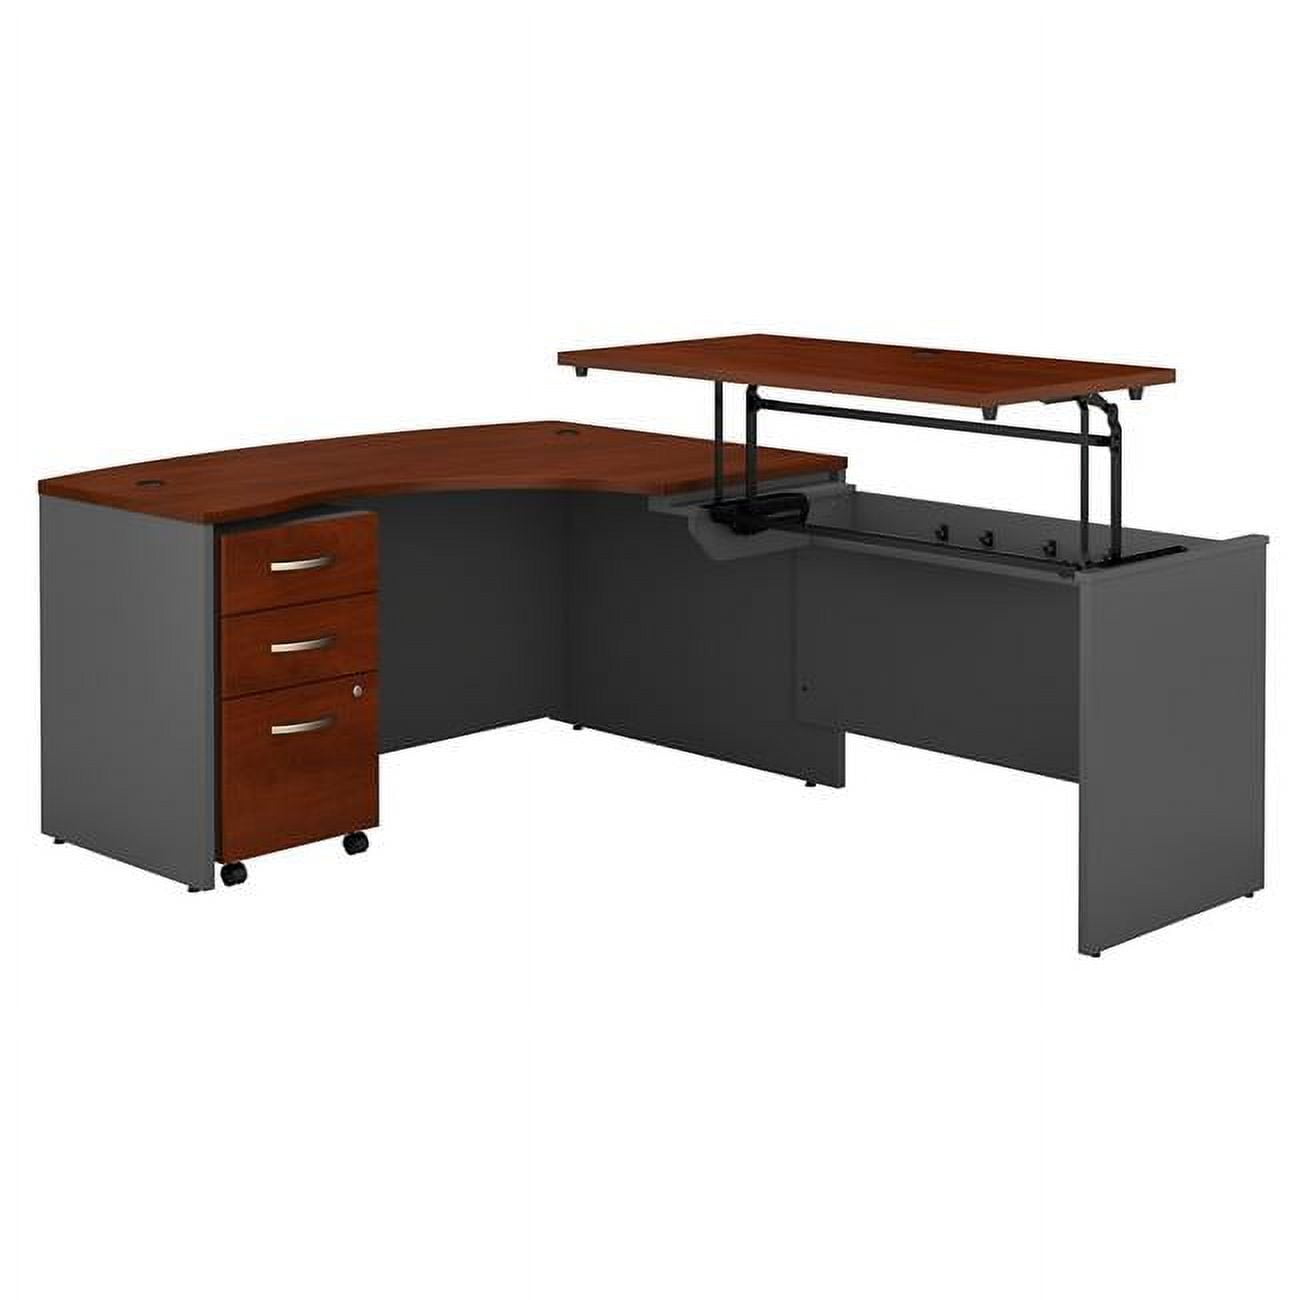 Picture of Bush Business Furniture SRC128HCSU 60 x 43 in. Series C Right Hand 3 Position Sit to Stand L-Shaped Desk with Mobile File Cabinet - Hansen Cherry